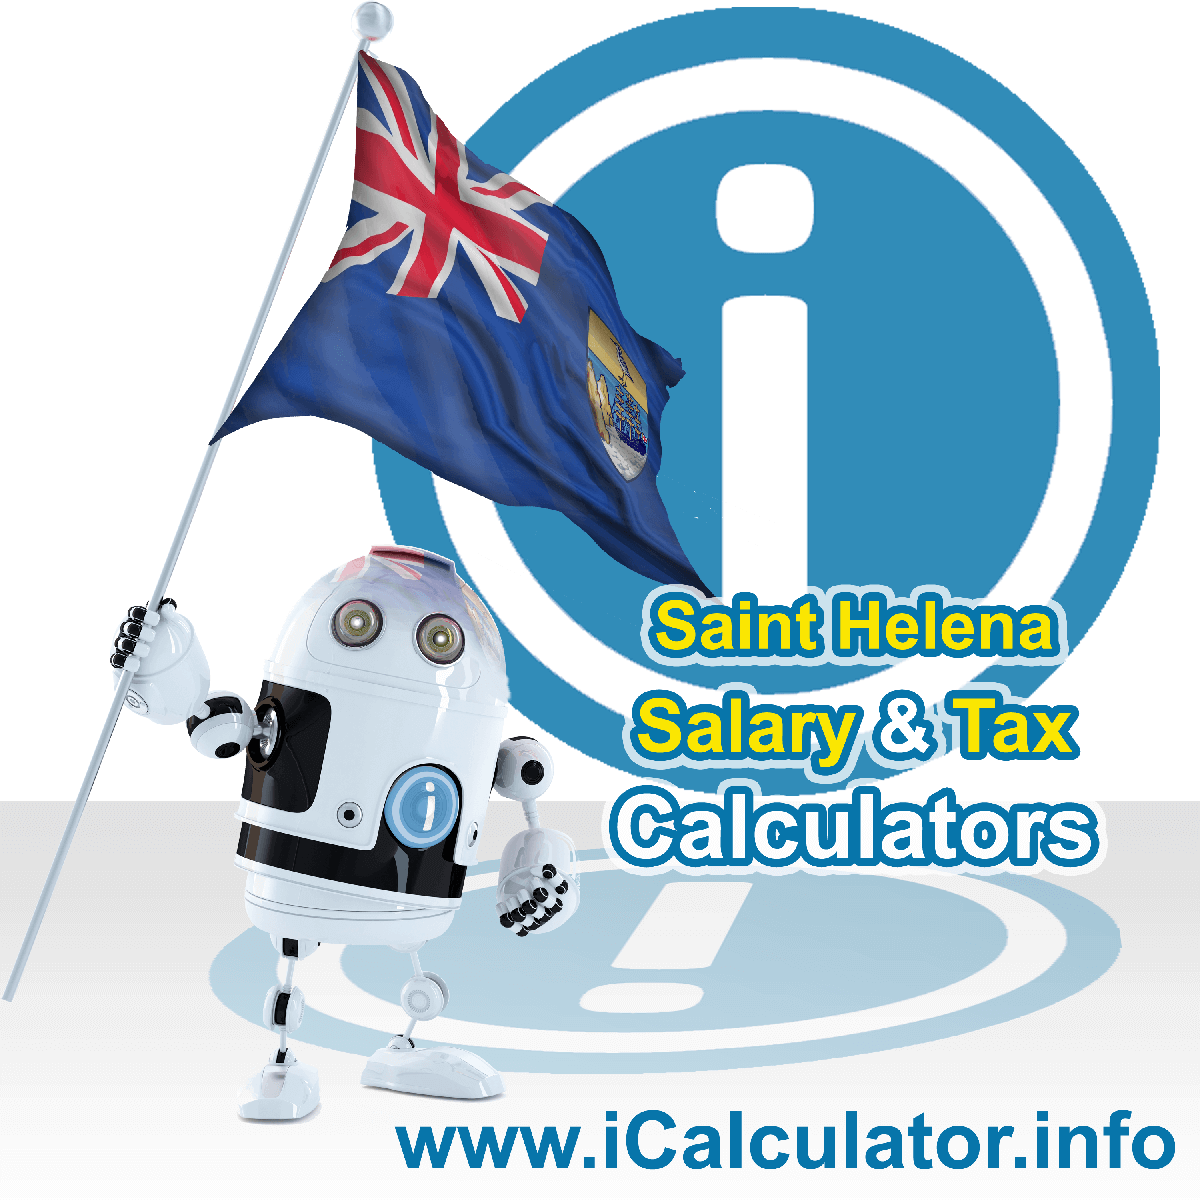 Saint Helena Wage Calculator. This image shows the Saint Helena flag and information relating to the tax formula for the Saint Helena Tax Calculator